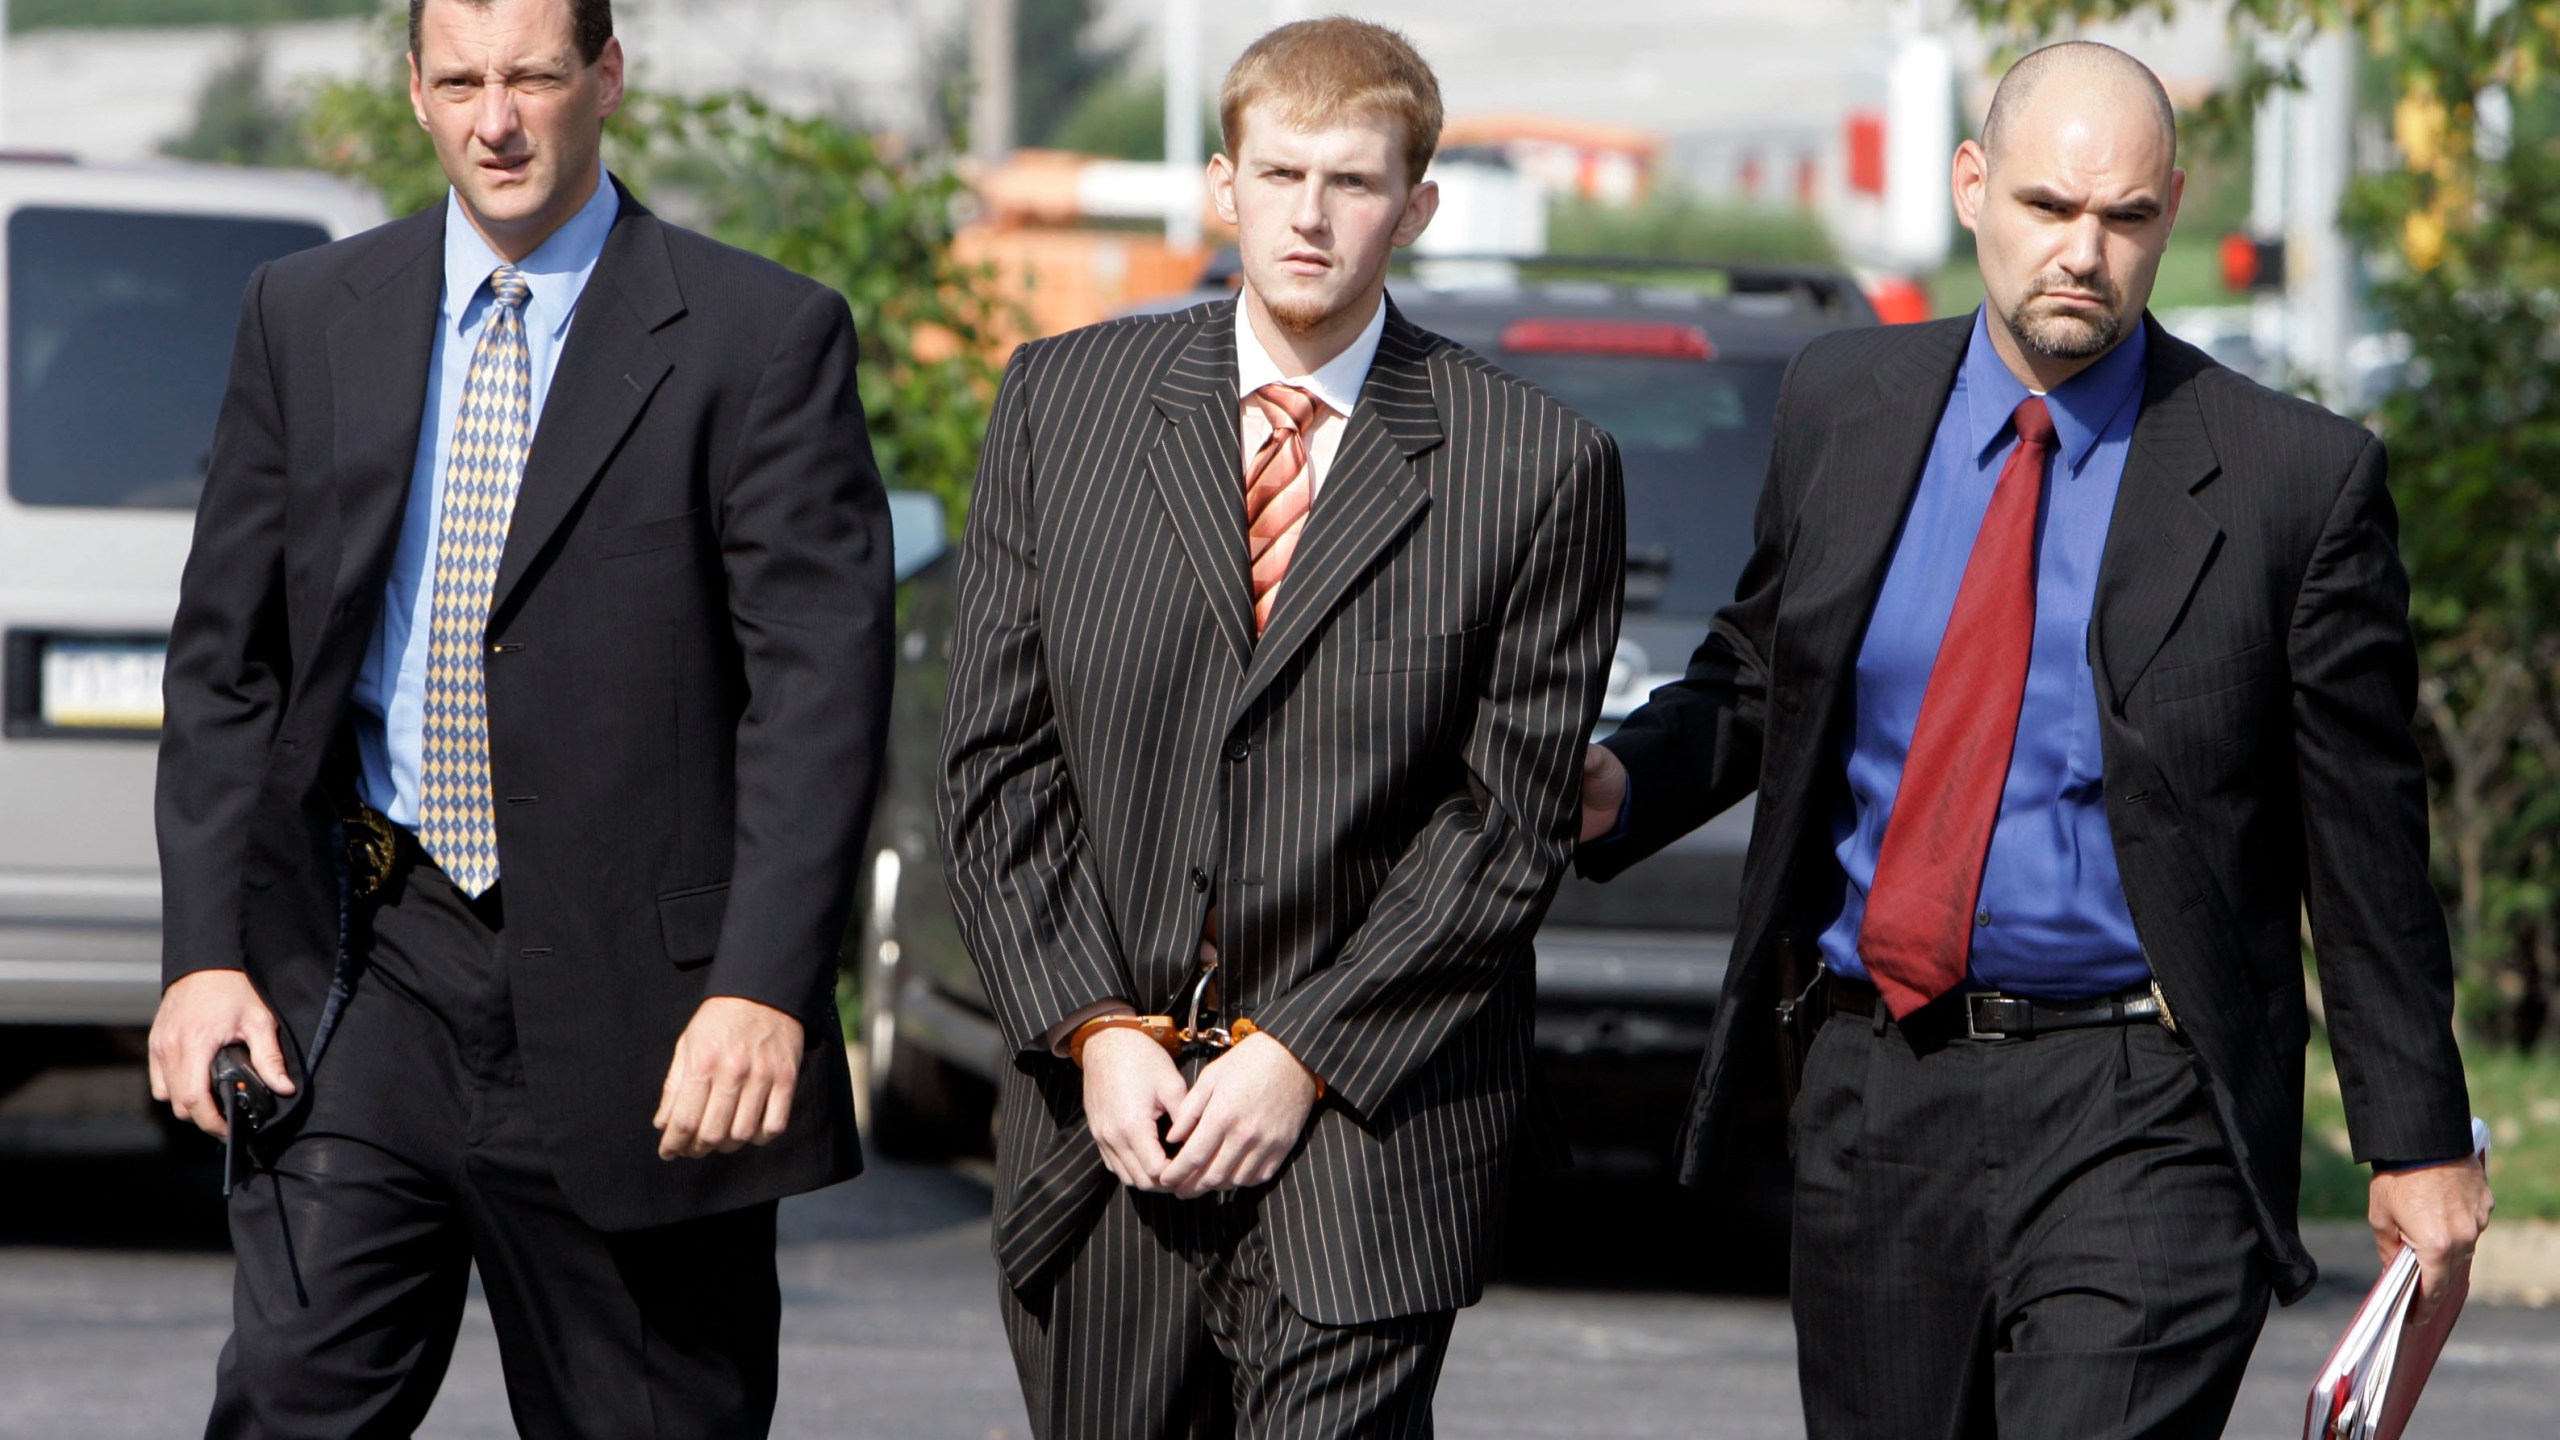 FILE - In this Aug. 29, 2007, file photo, former Kansas City Chiefs assistant coach Britt Reid is escorted into the Montgomery County district court house in Conshohocken, Pa. Missouri Gov. Mike Parson on Friday, March 1, 2024, shortened the prison sentence of Reid for a drunken driving crash that seriously injured a 5-year-old girl. (AP Photo/Matt Rourke, File)